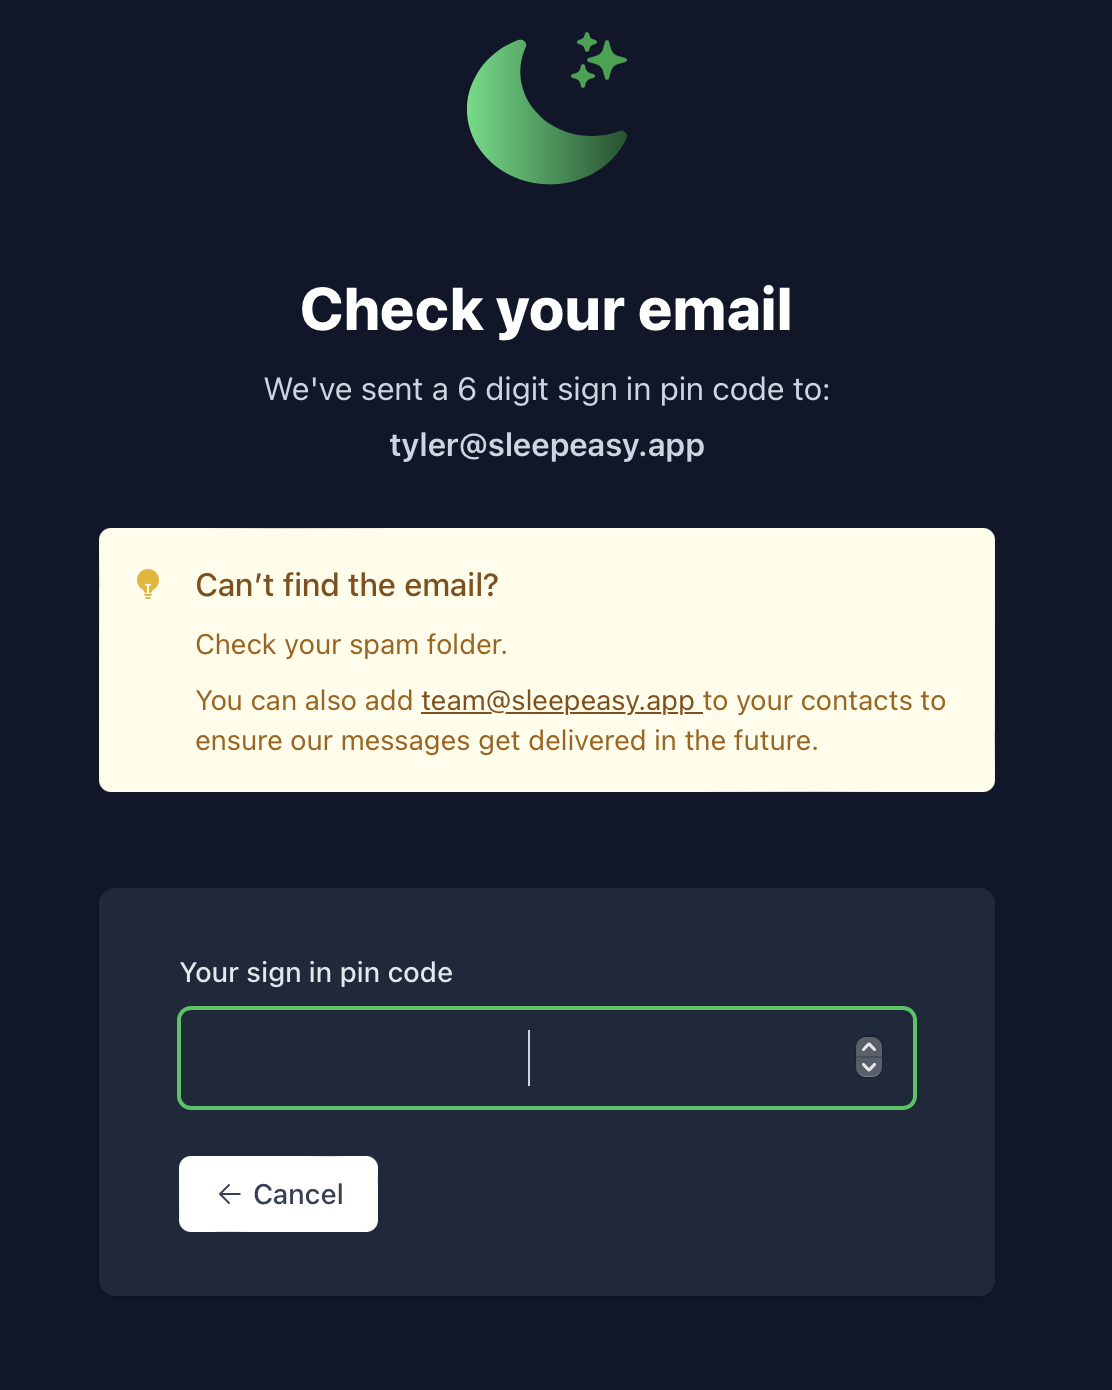 The passwordless login prompt for SleepEasy, now with a prominent callout to check your spam folder